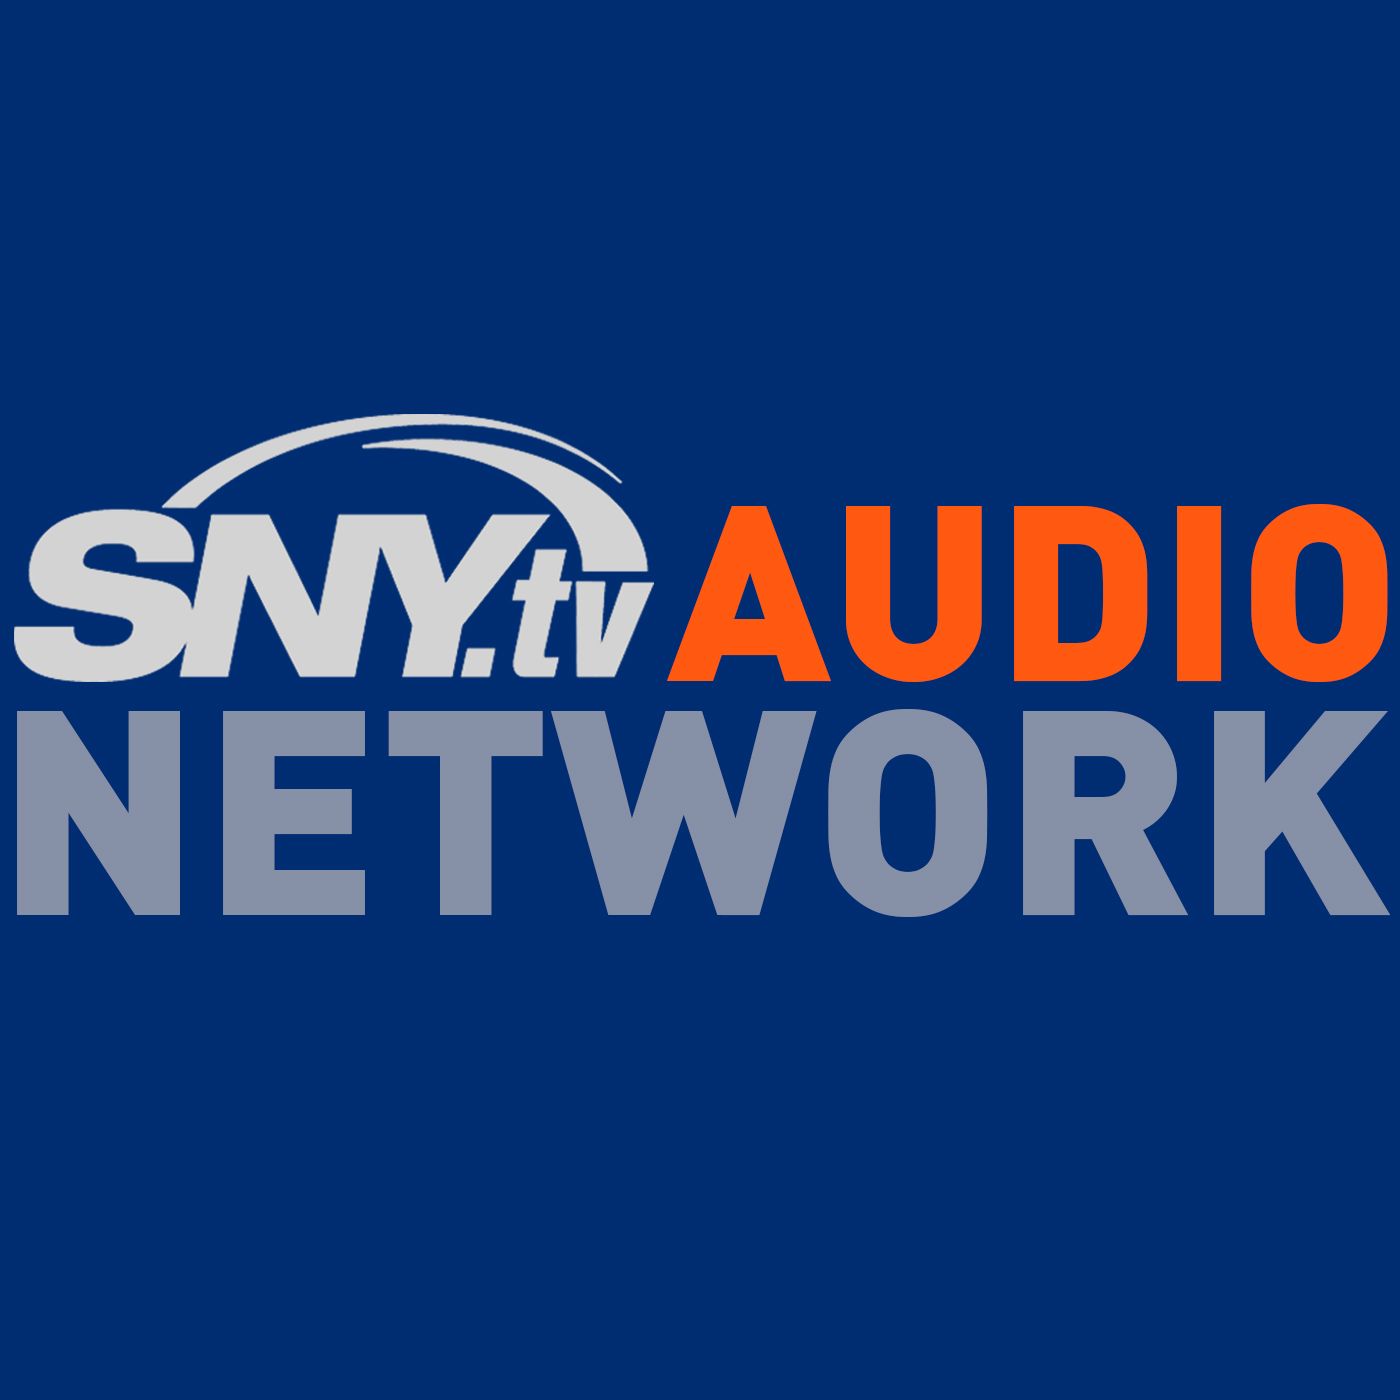 Stream SNY Audio Network Listen to podcast episodes online for free on SoundCloud